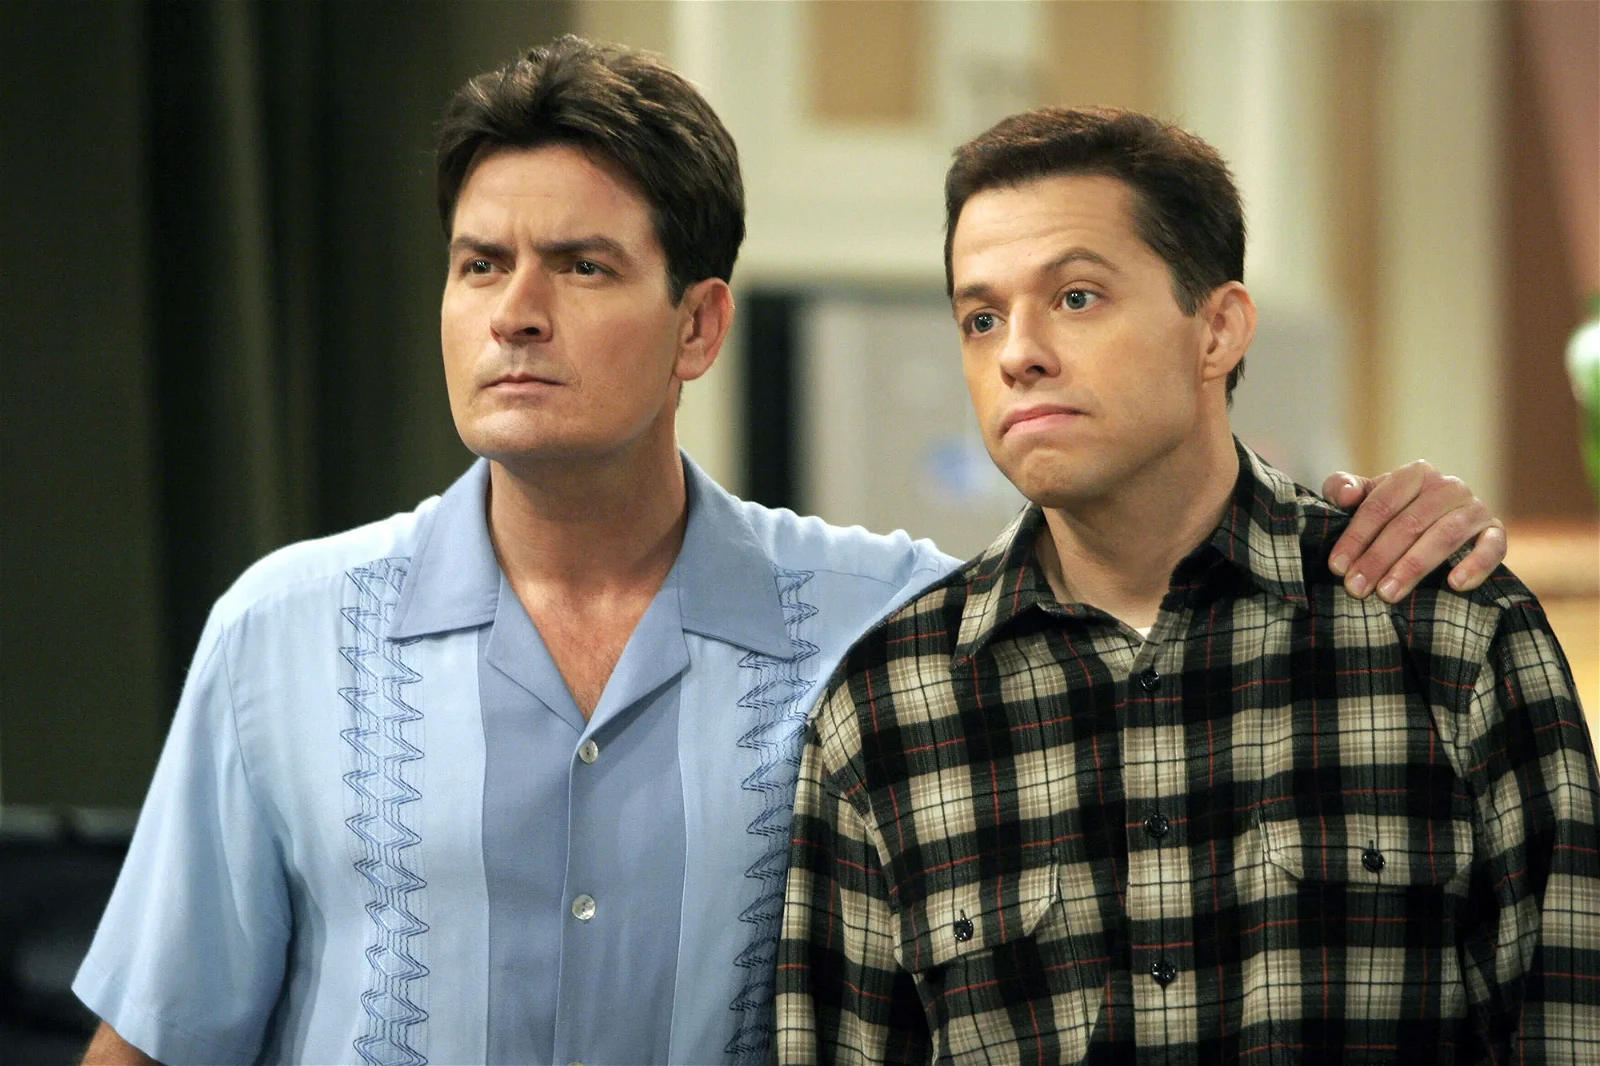 Jon Cryer and Charlie Sheen in Two and a Half Men